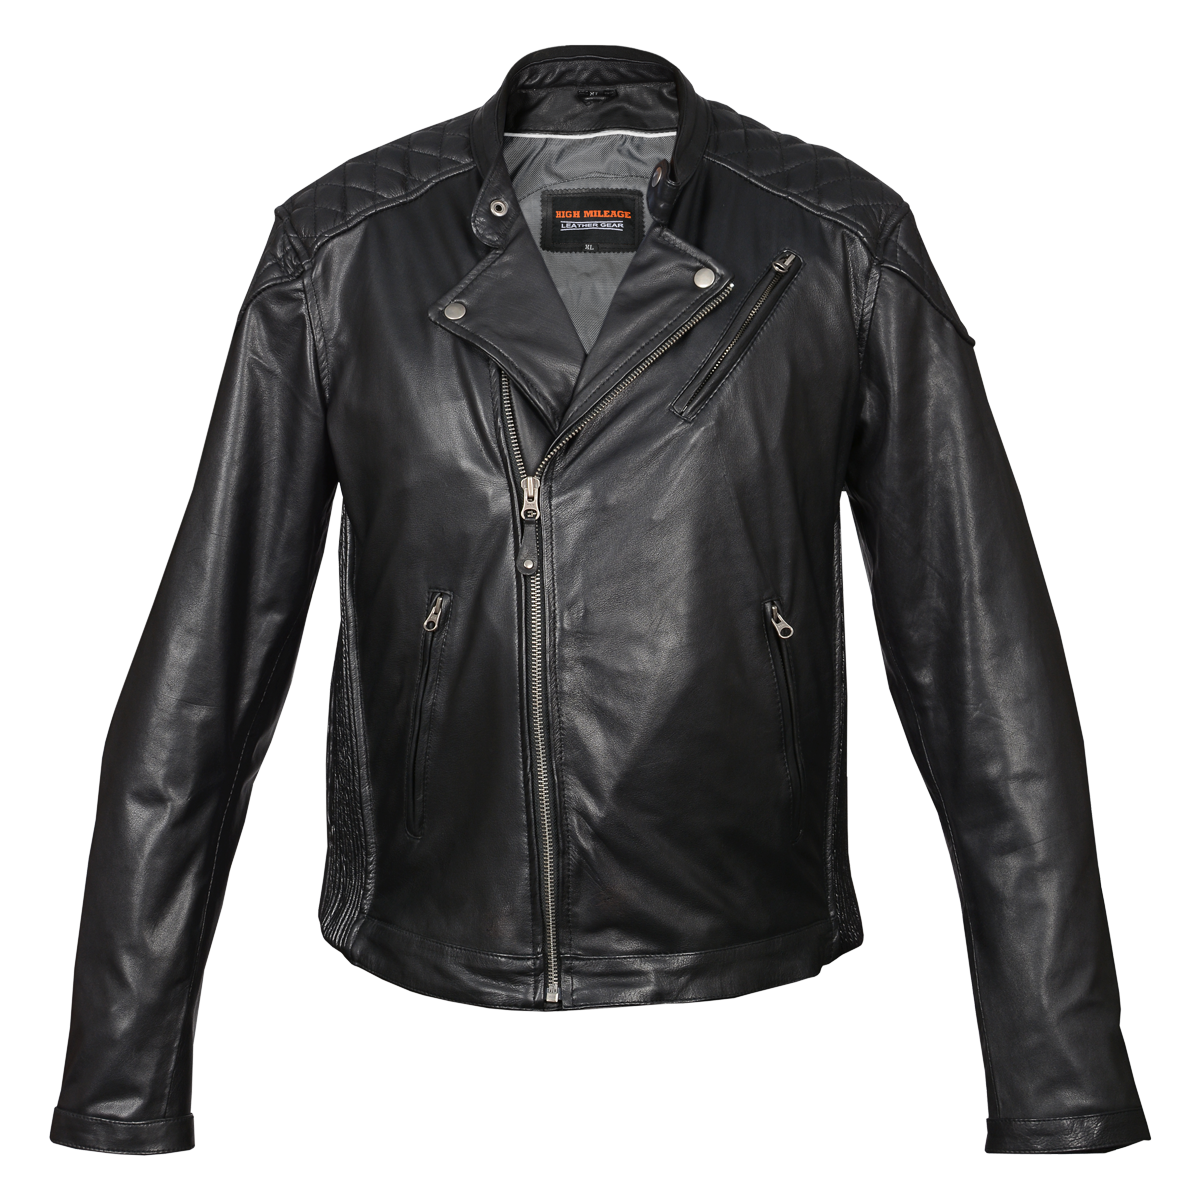 HMM521 High Mileage Men's Black Leather Jacket with Diamond Stitched Shoulders